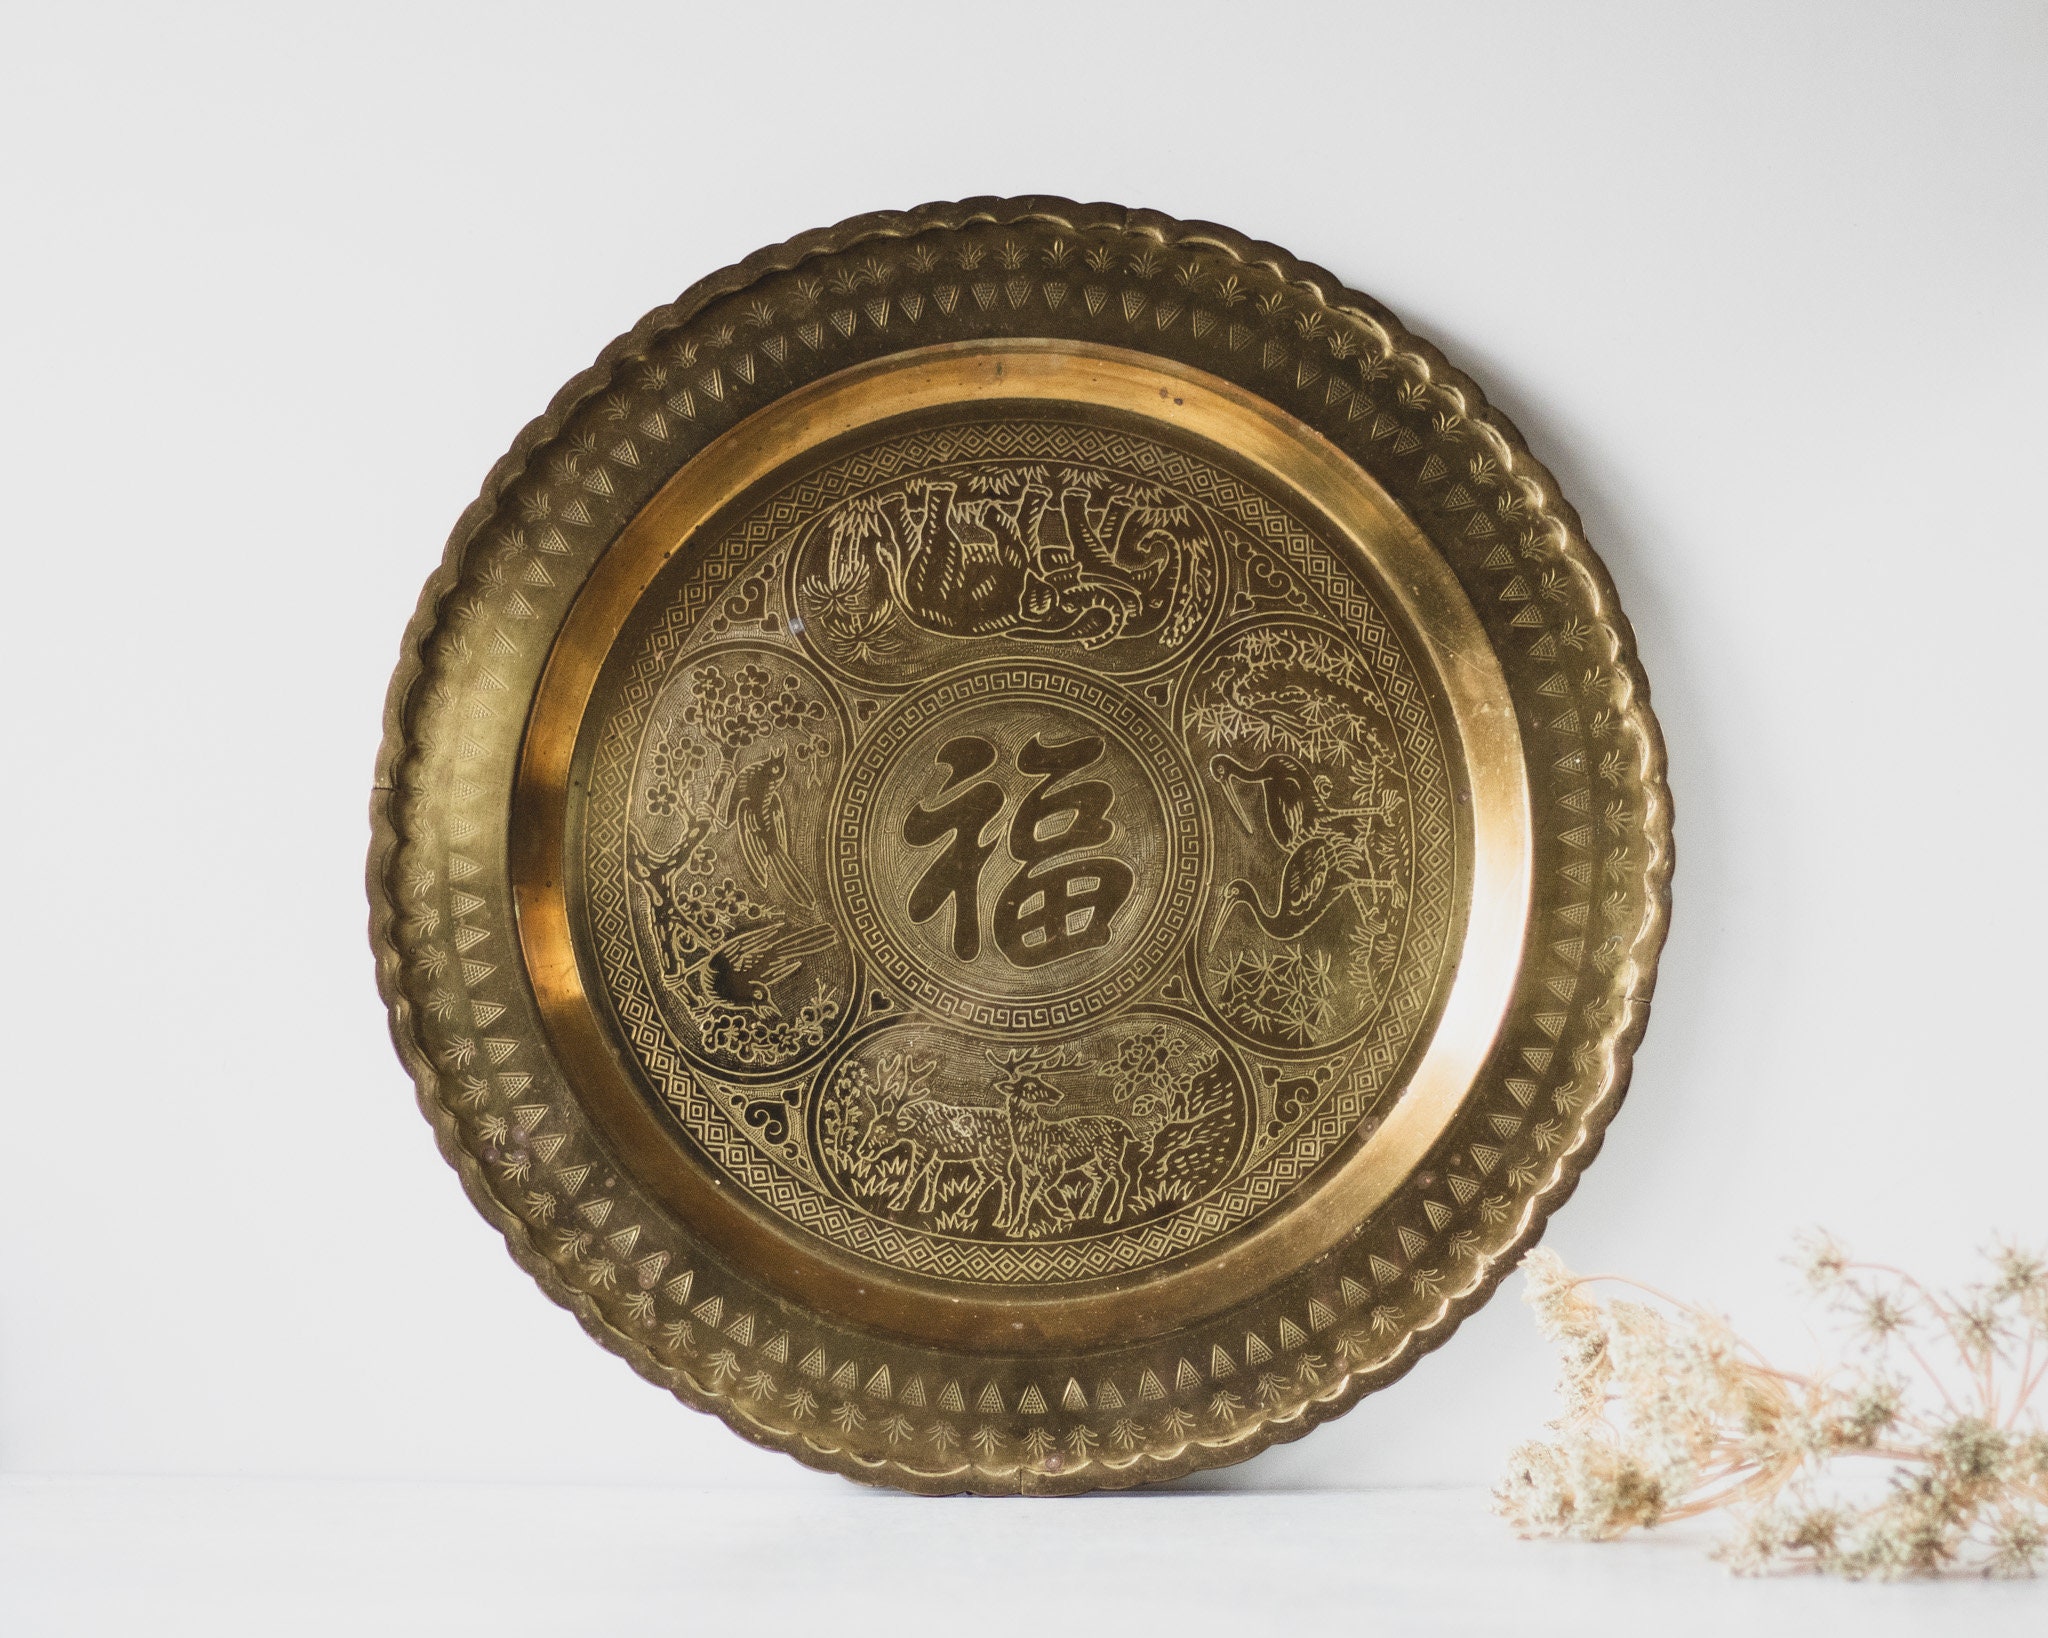 China trade cast and engraved brass tray (1880) – The Federalist